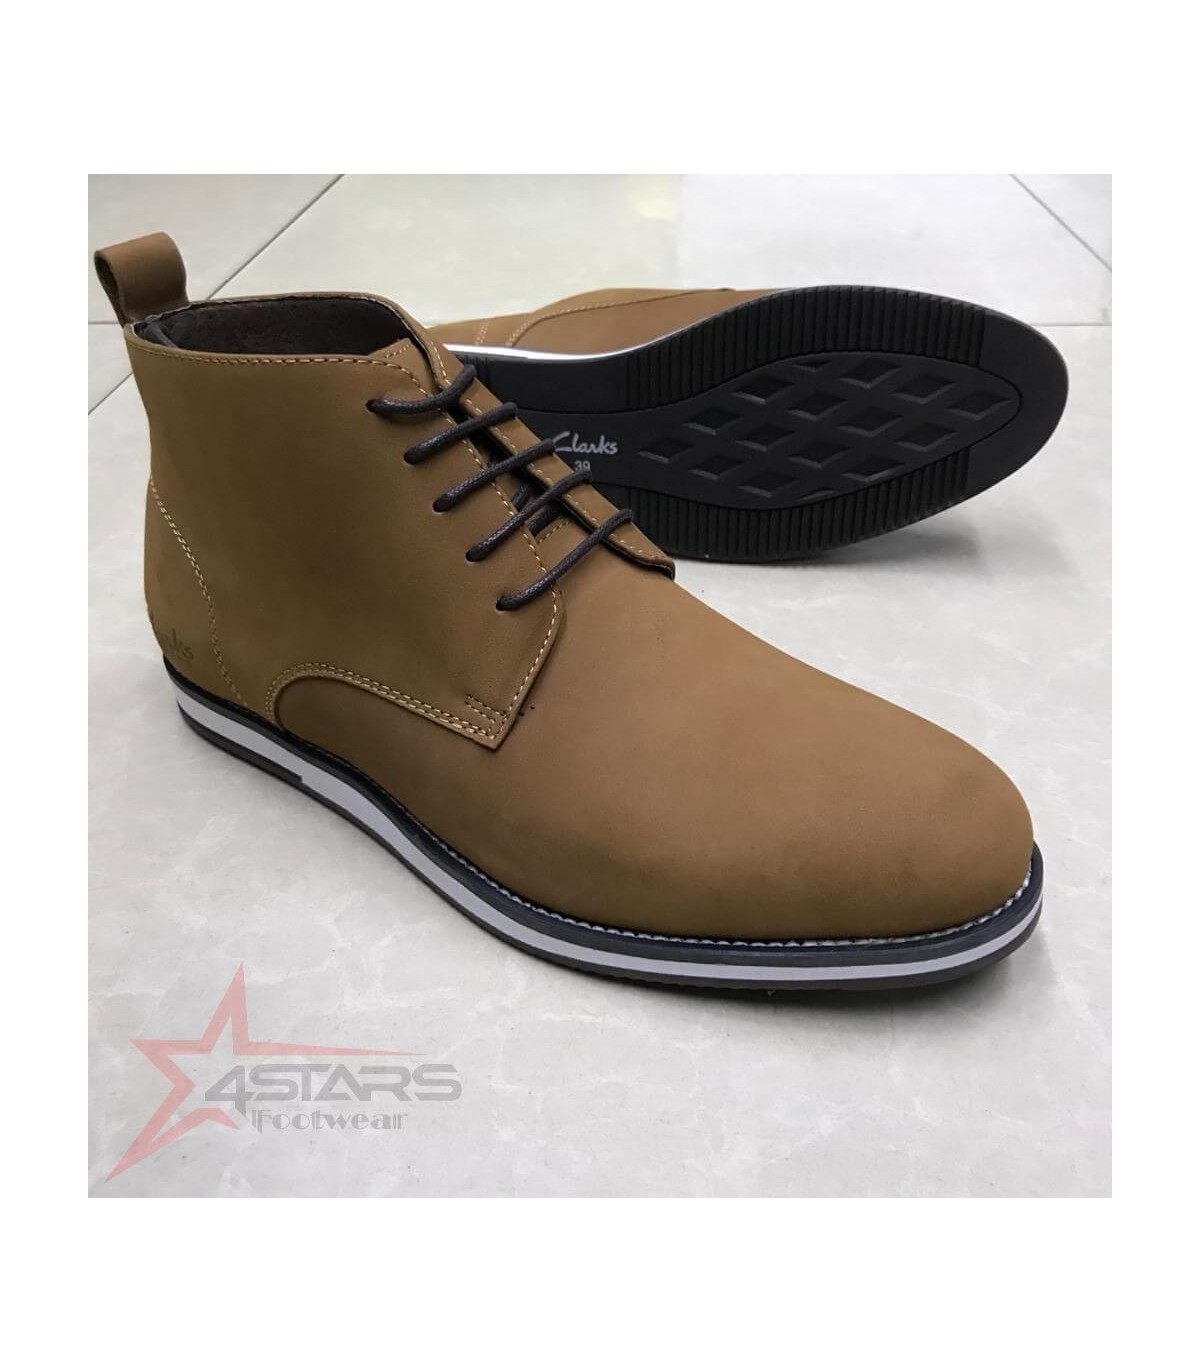 Clarks Suede Leather Casual Boots - Brown